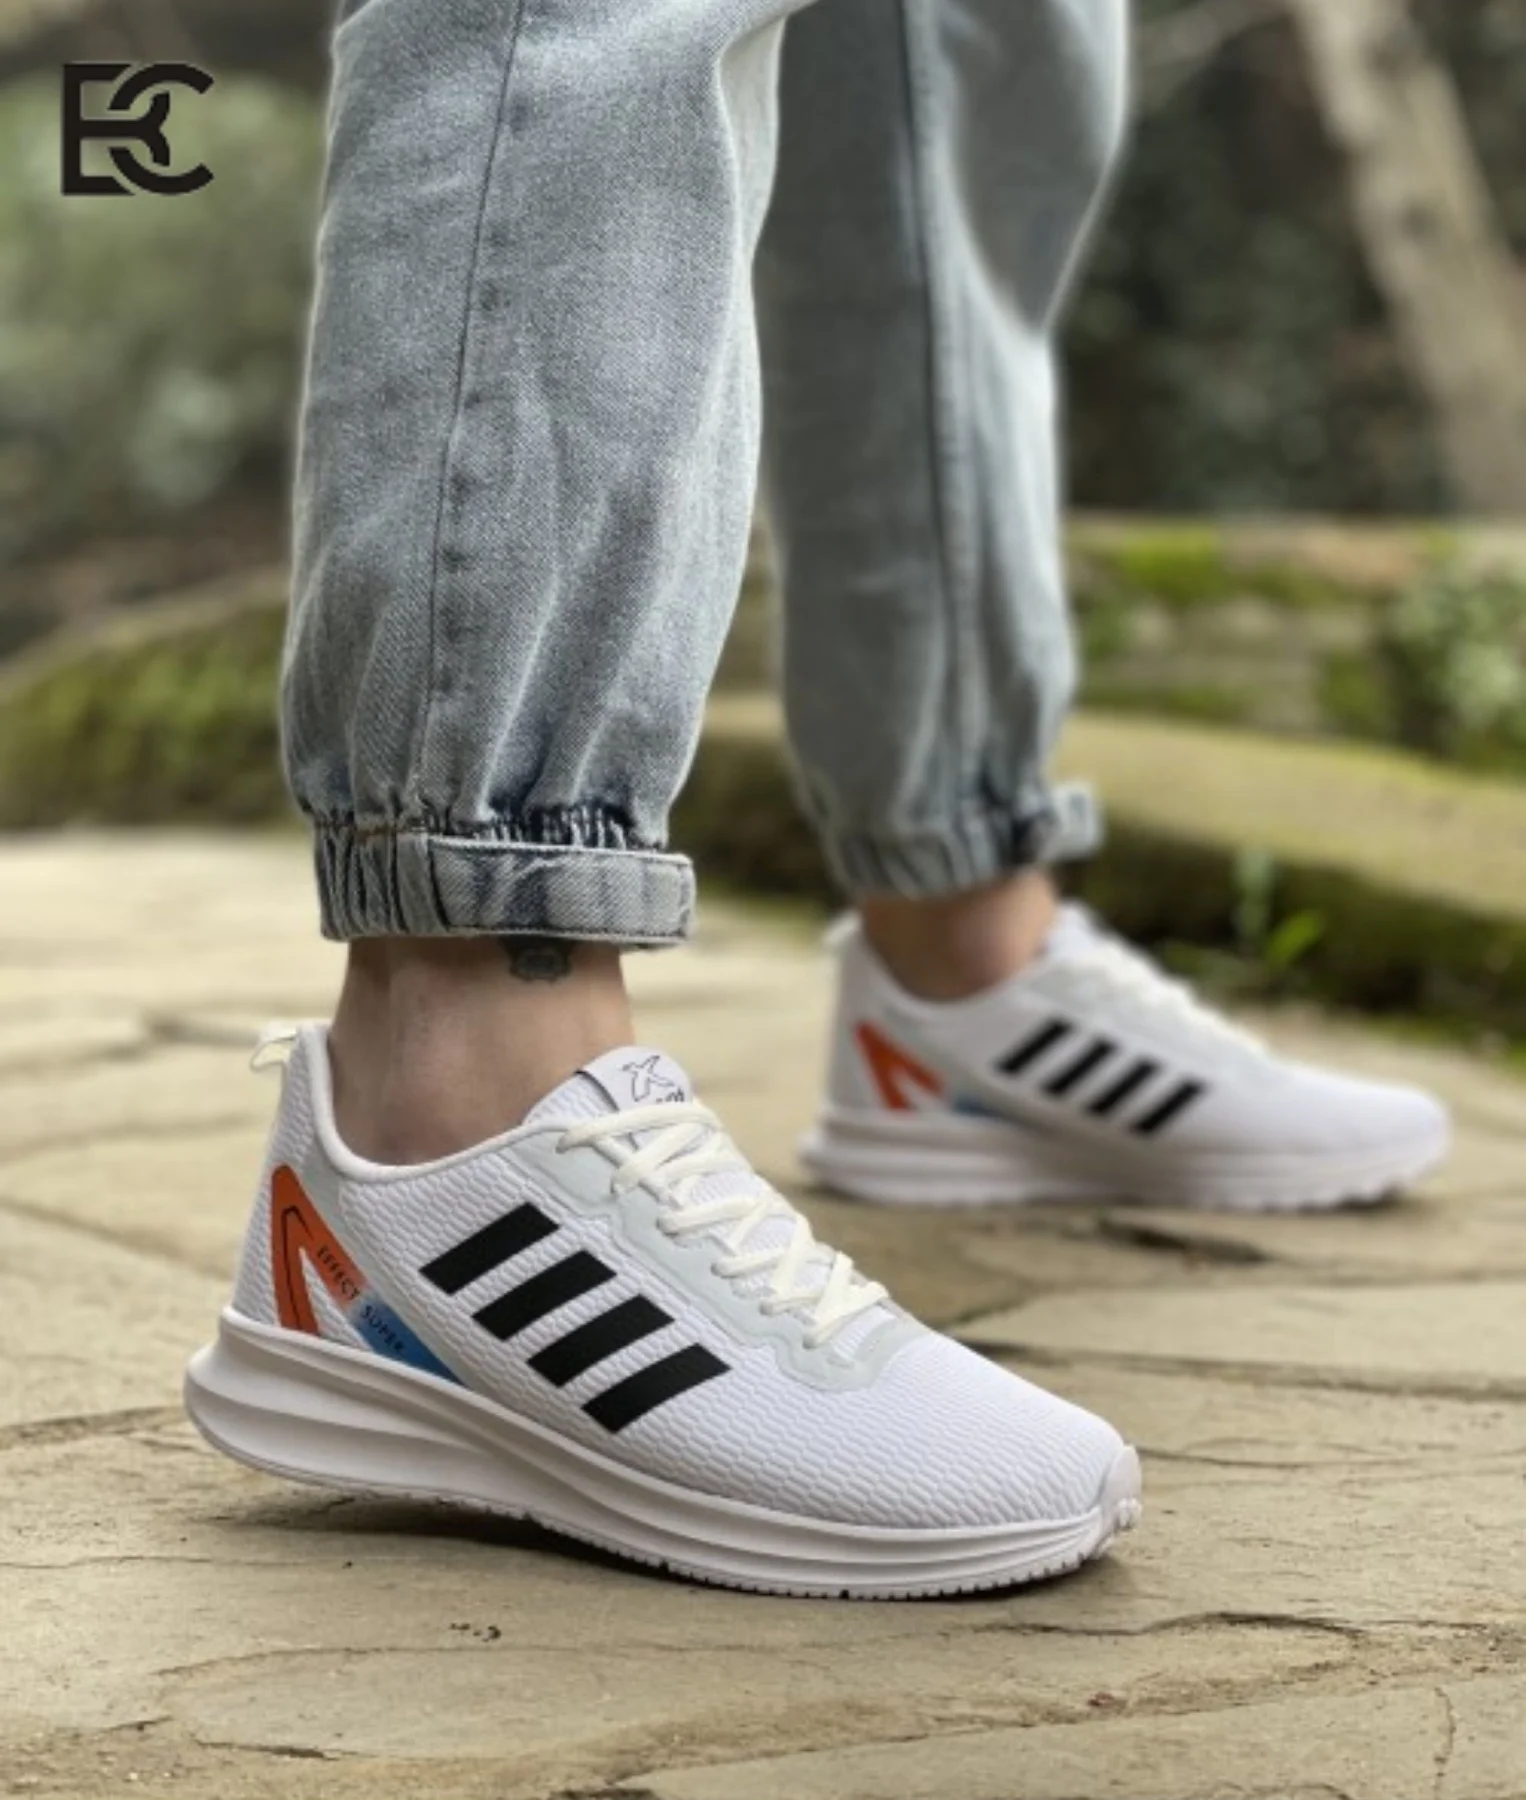 Men's Tennis Sneakers Summer Breathable Casual Male Hiking Sport Shoes Big Size Casual Man Sneakers Orthotic Insole